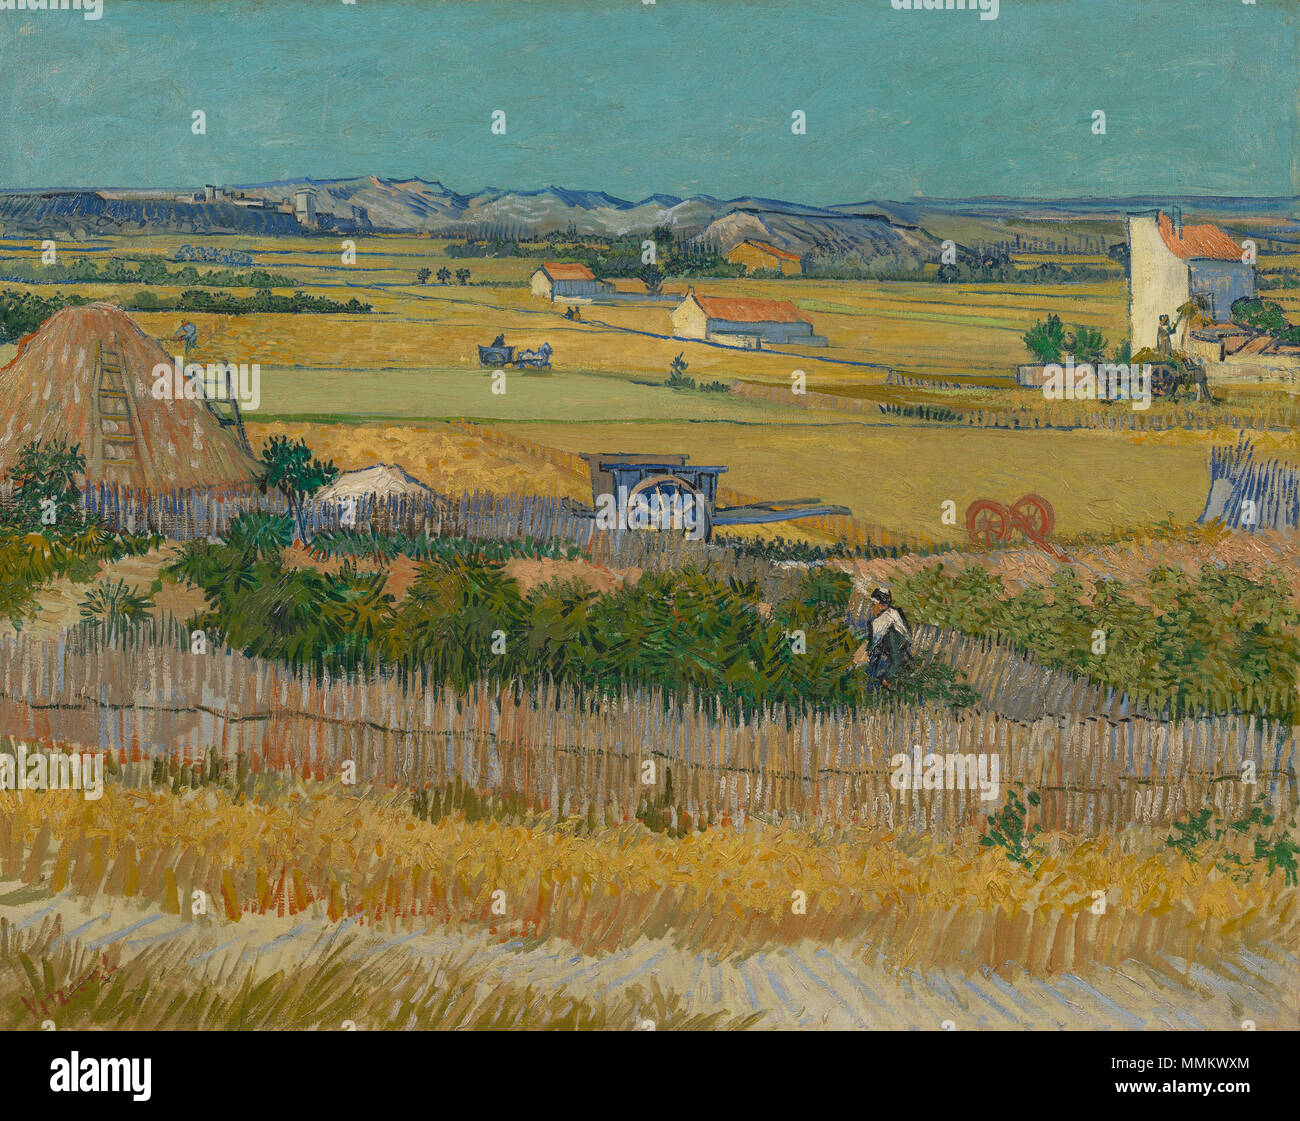 .  English: Painting by Vincent van Gogh, 1888 Nederlands: Schilderij van Vincent van Gogh, 1888  English: The Harvest Nederlands: De oogst . 1888. De oogst - s0030V1962 - Van Gogh Museum Stock Photo